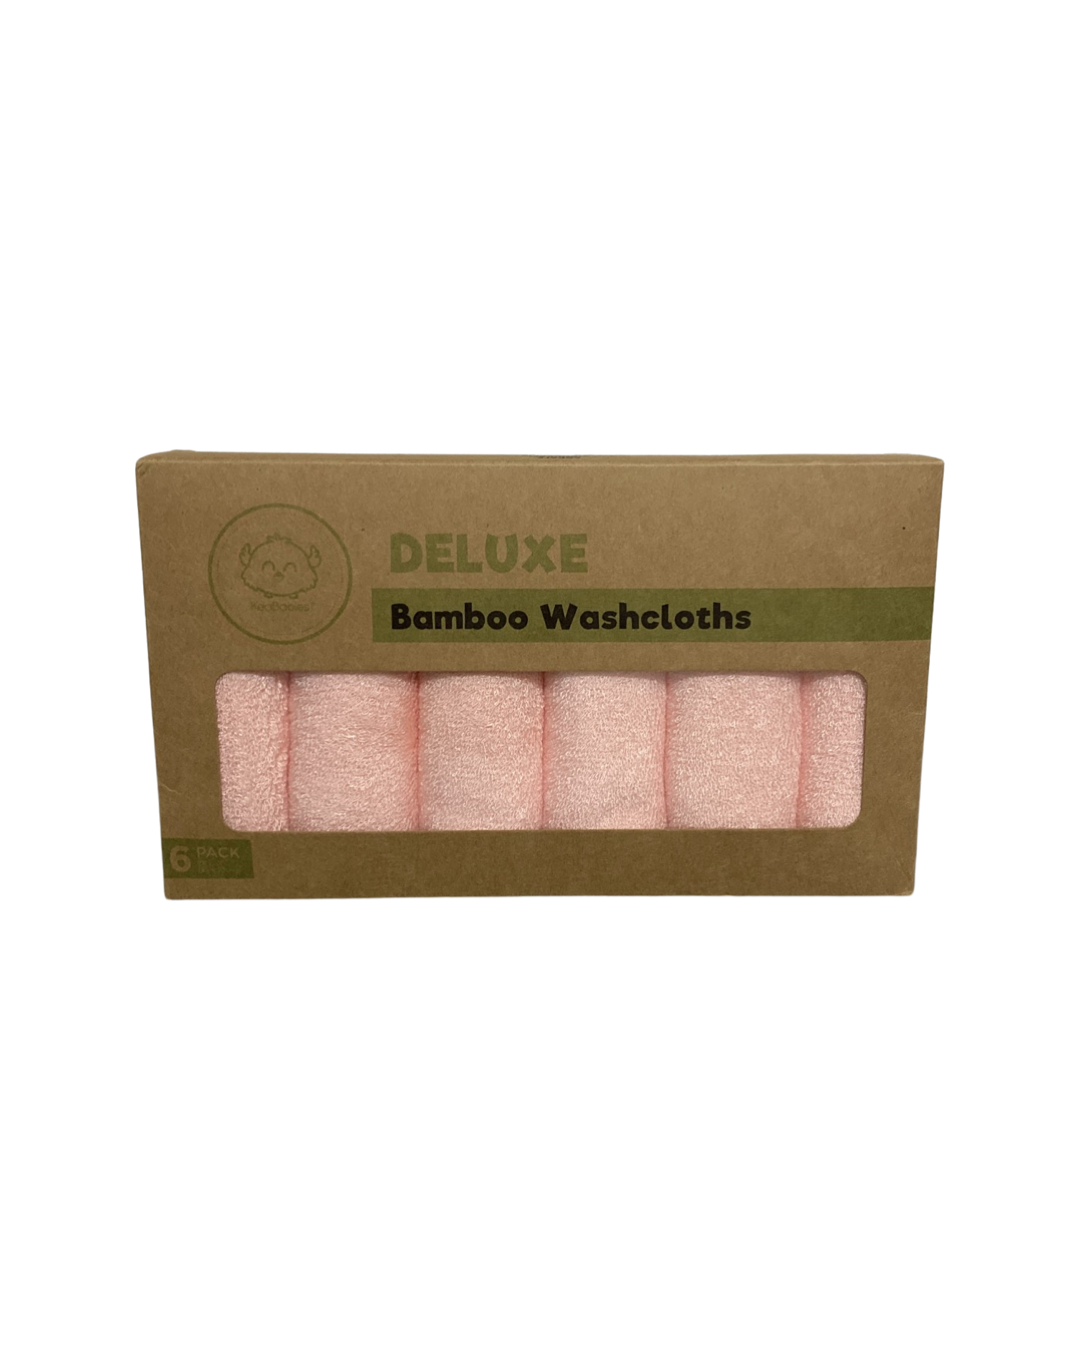 KeaBabies Deluxe Bamboo Washcloths 6PK, Color: Pink